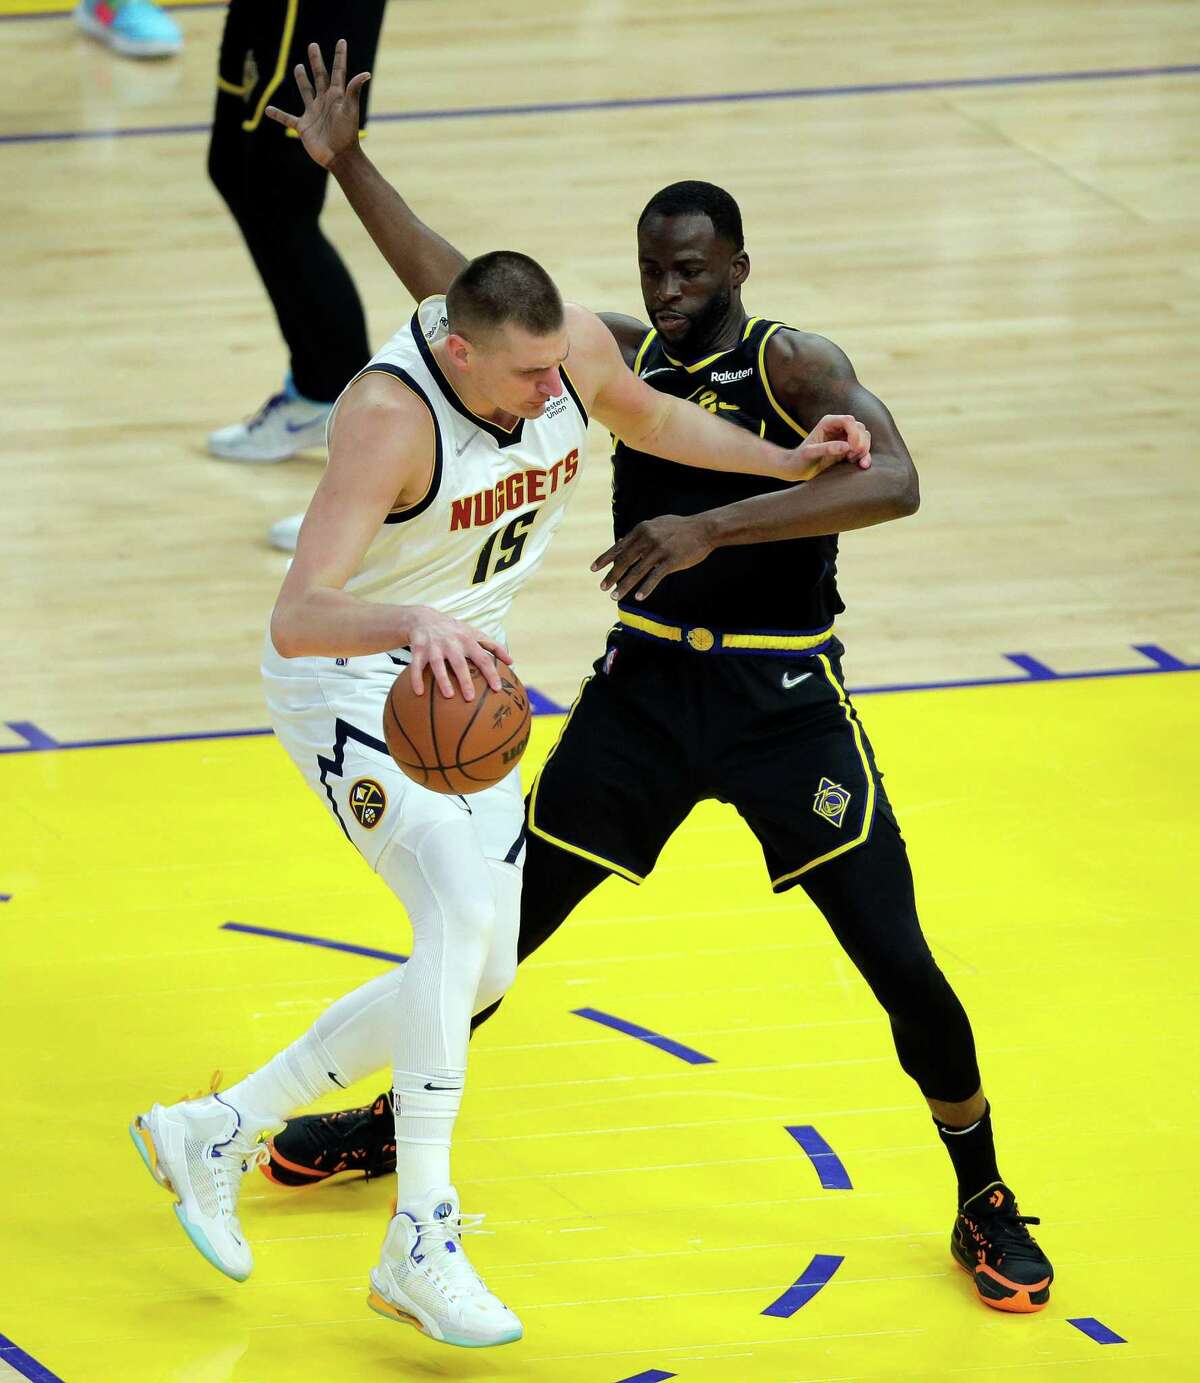 Draymond Green (23) defends against Nikola Jokic (15) as the Golden State Warriors played the Denver Nuggets in Game 5 of the first round of the NBA Playoffs at Chase Center in San Francisco, Calif., on Wednesday, April 27, 2022.